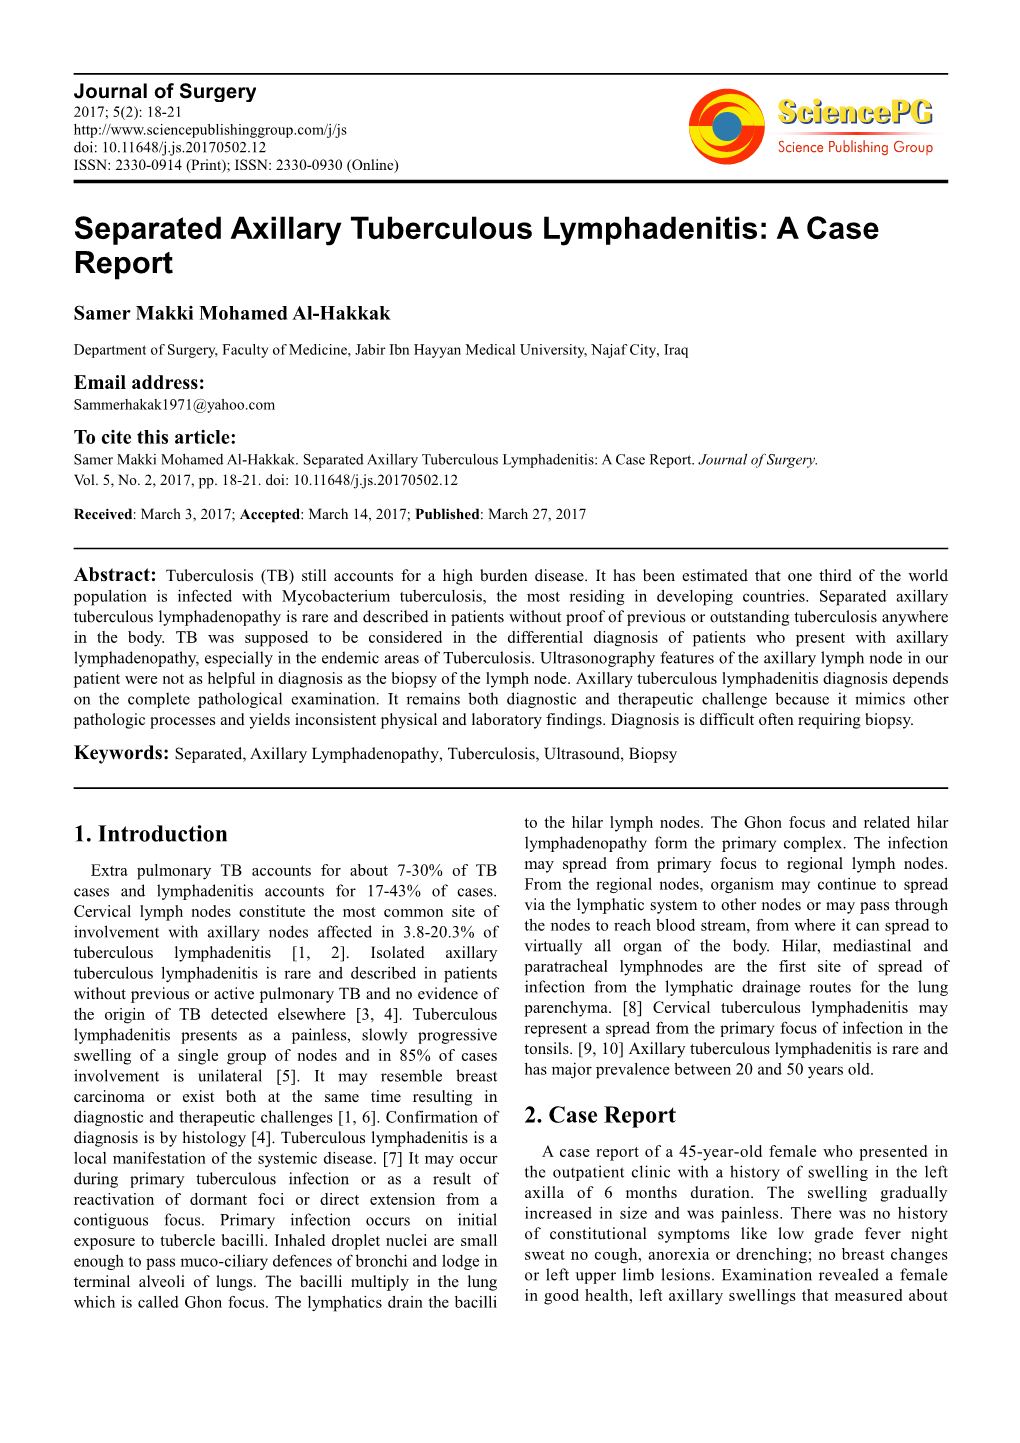 Separated Axillary Tuberculous Lymphadenitis: a Case Report